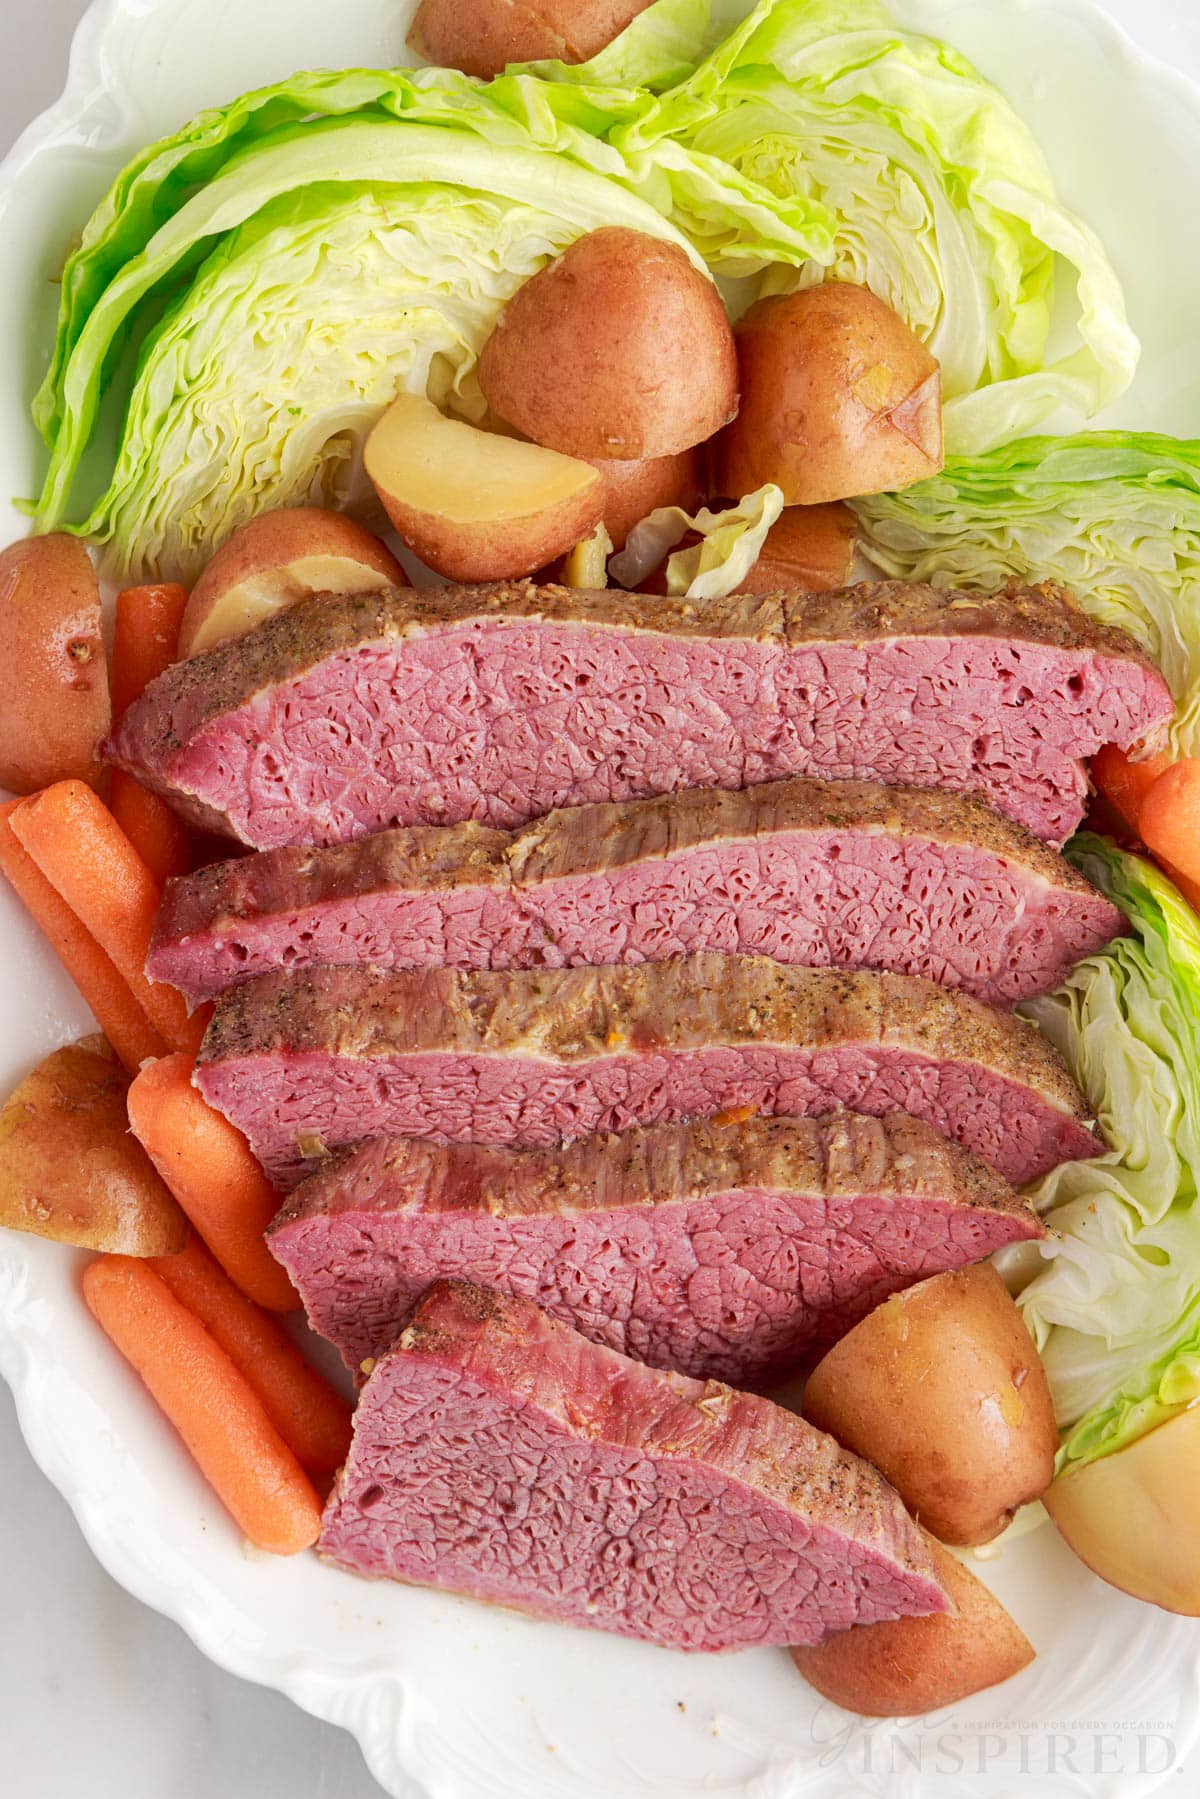 corned beef cut into slices on plate with cabbage carrots and potatoes